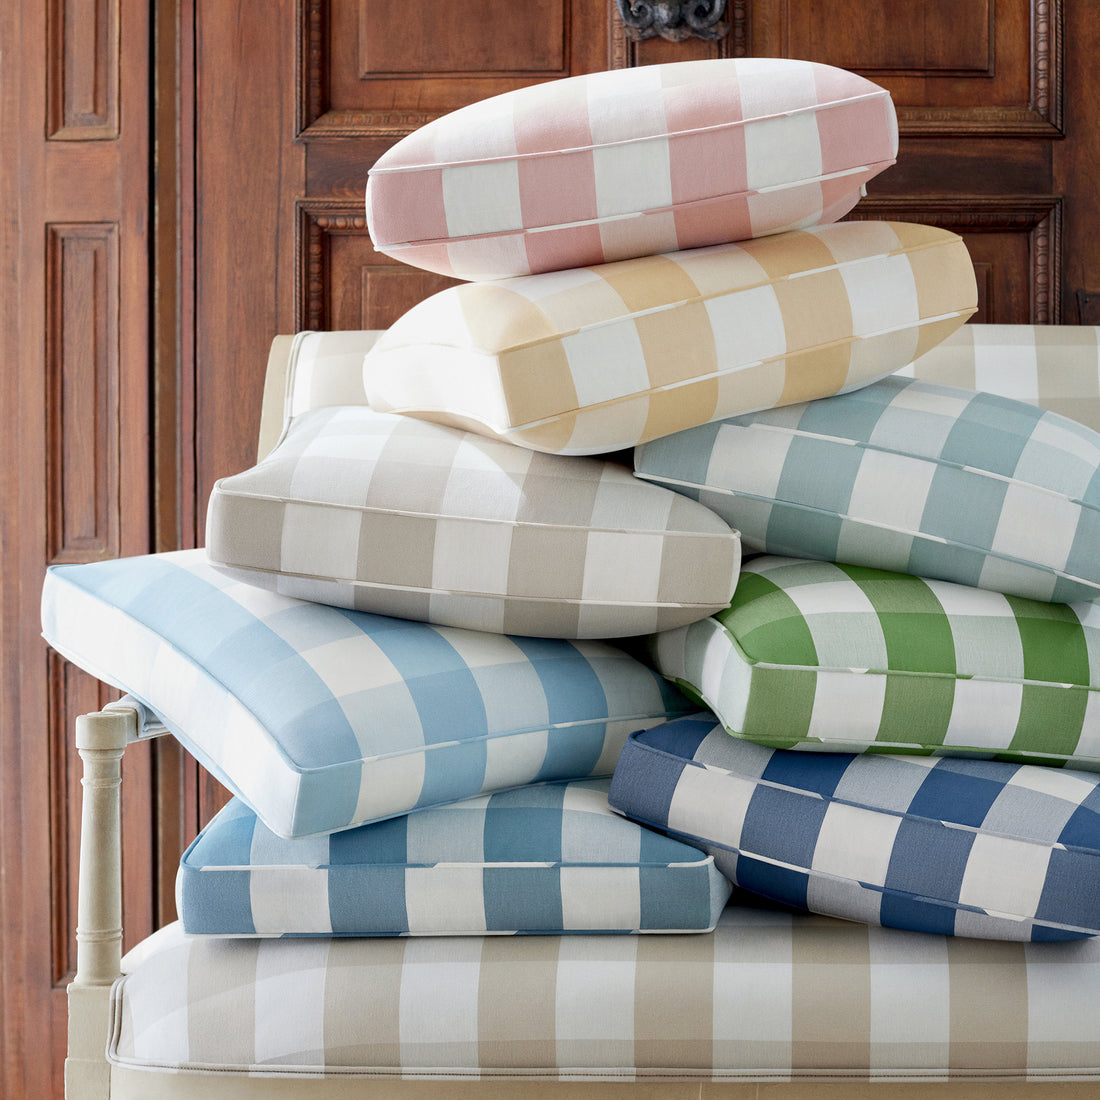 Pillows in Hammond Check woven fabric - pattern number AW24501 - by Anna French in the Devon collection